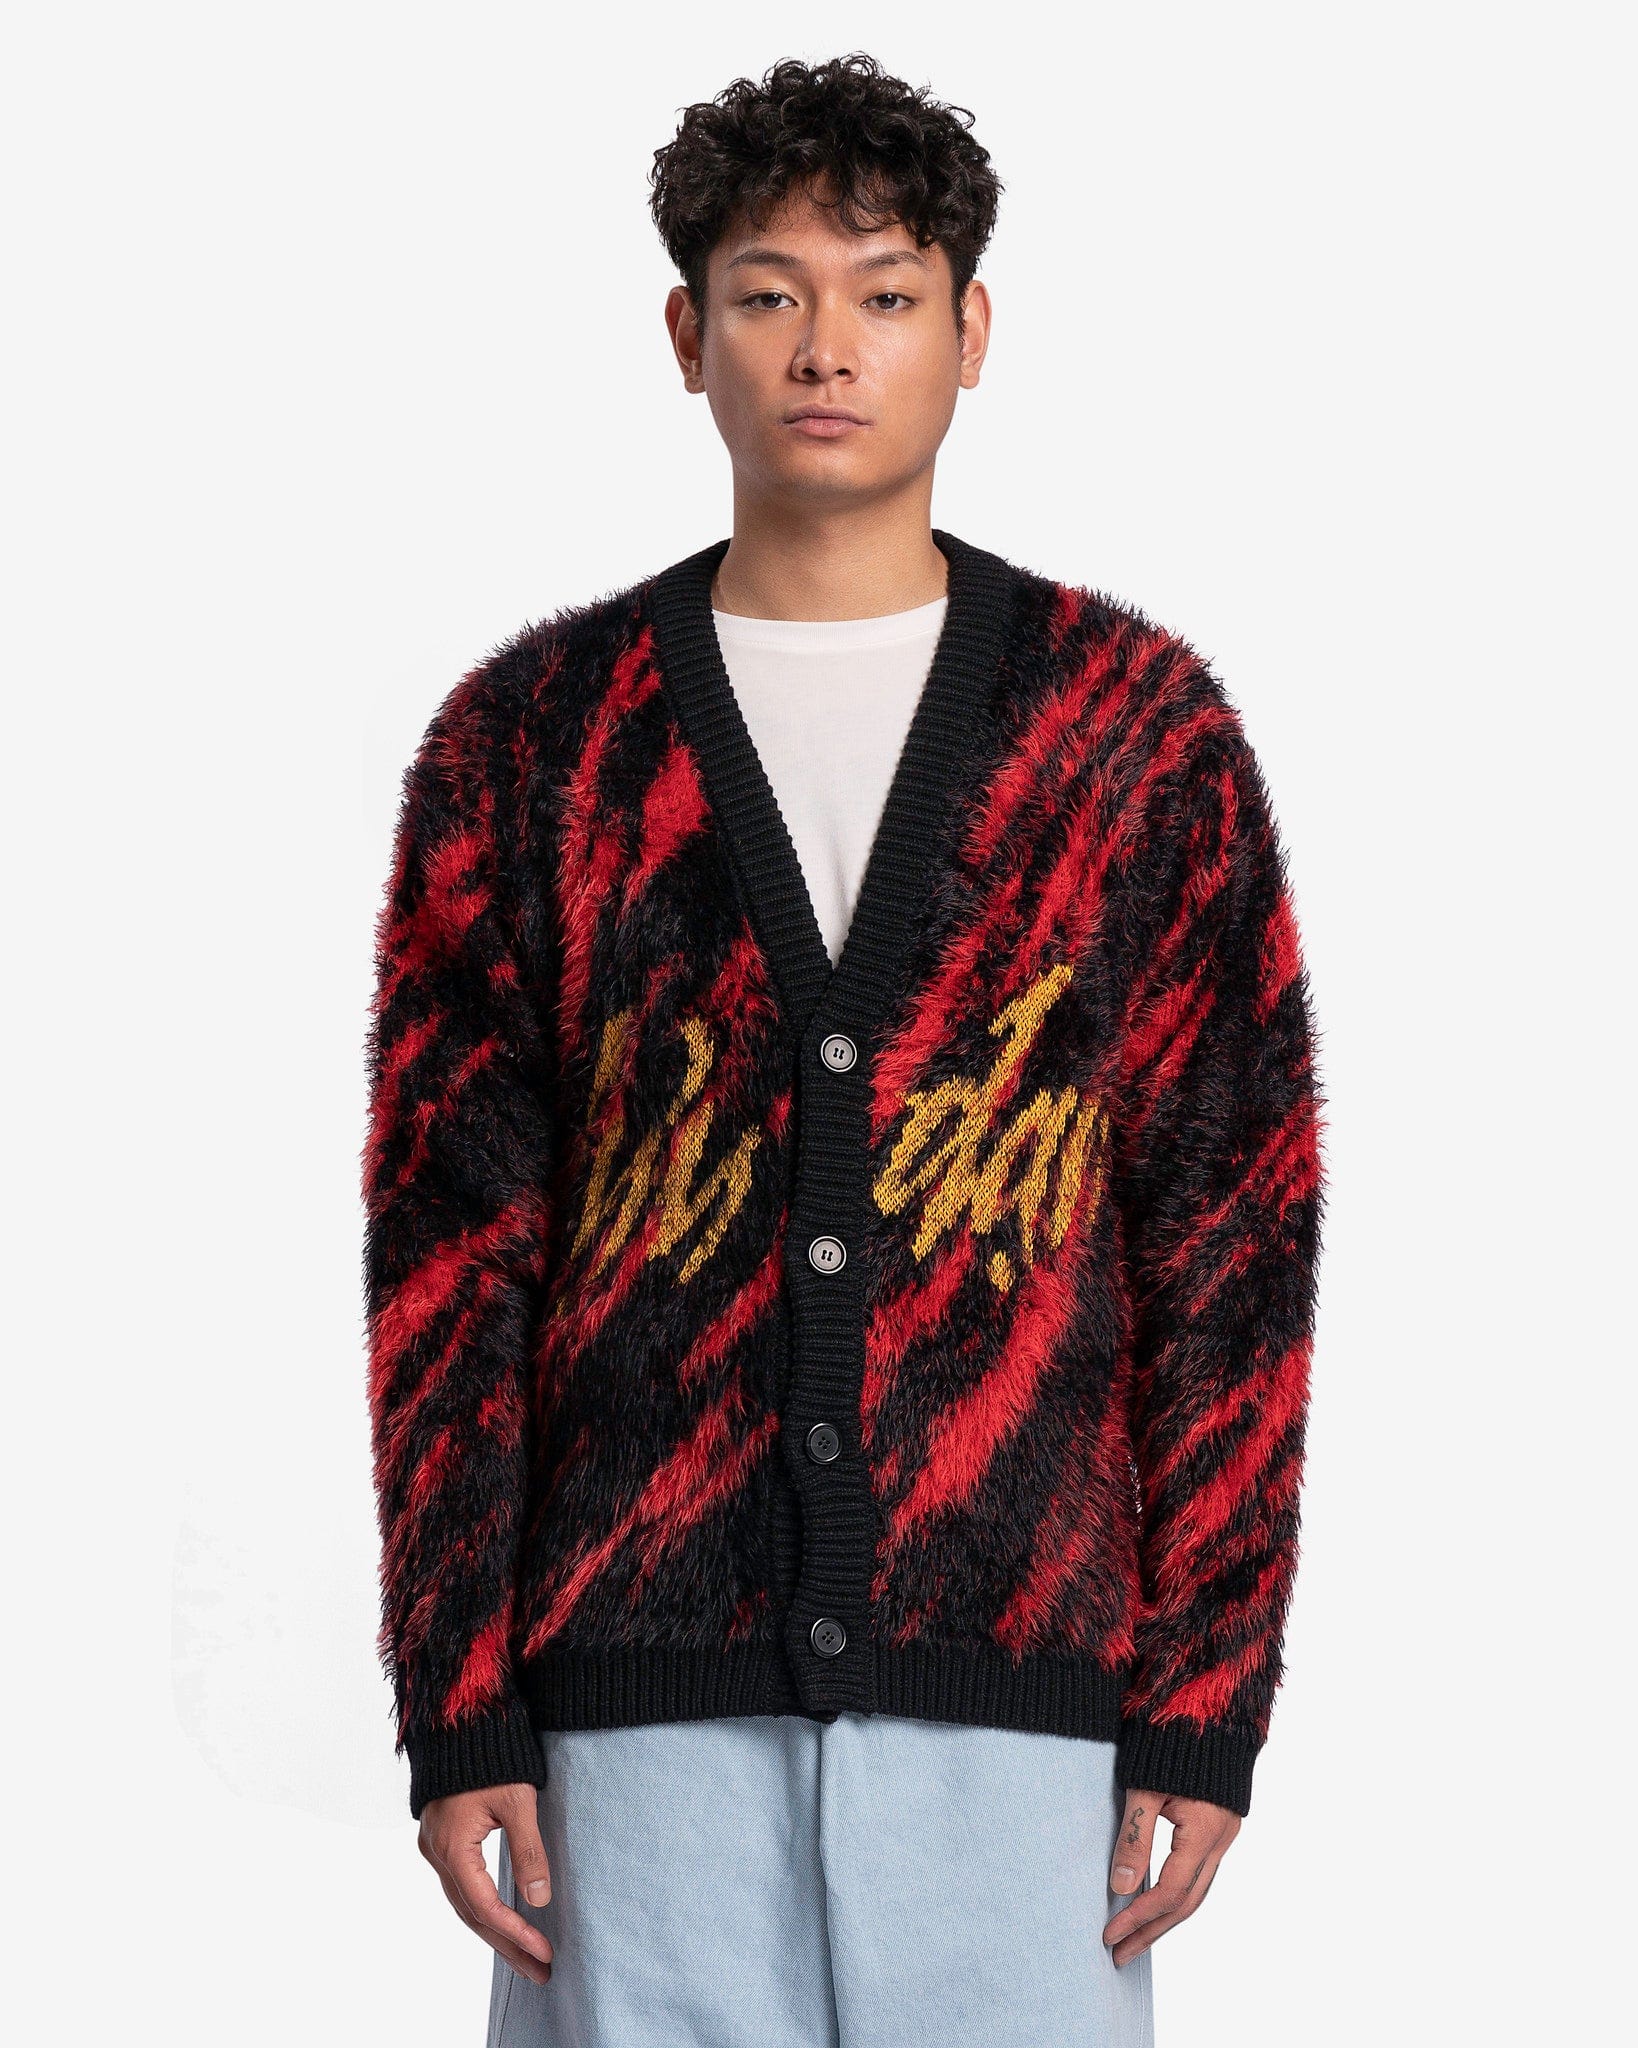 Knit Oversized Mohair Jacquard Cardigan in Black/Red